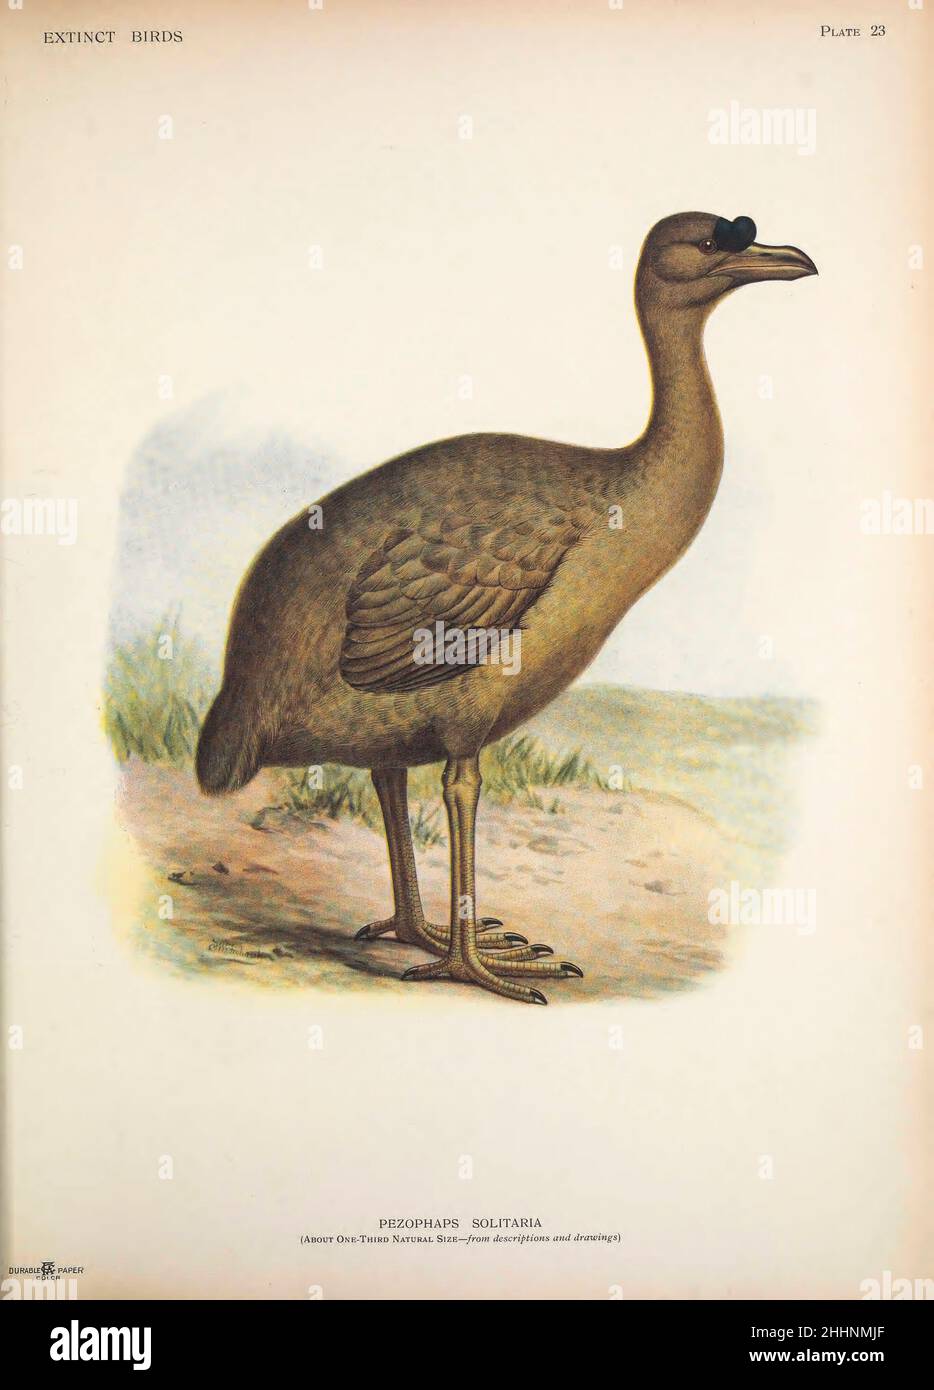 The Rodrigues solitaire (Pezophaps solitaria) is an extinct flightless bird that was endemic to the island of Rodrigues, east of Madagascar in the Indian Ocean Restoration by Frederick William Frohawk, 1907 from ' Extinct birds ' : an attempt to unite in one volume a short account of those birds which have become extinct in historical times : that is, within the last six or seven hundred years : to which are added a few which still exist, but are on the verge of extinction. by Baron, Lionel Walter Rothschild, 1868-1937 Published 1907 as a limited edition book in London by Hutchinson & Co. Stock Photo